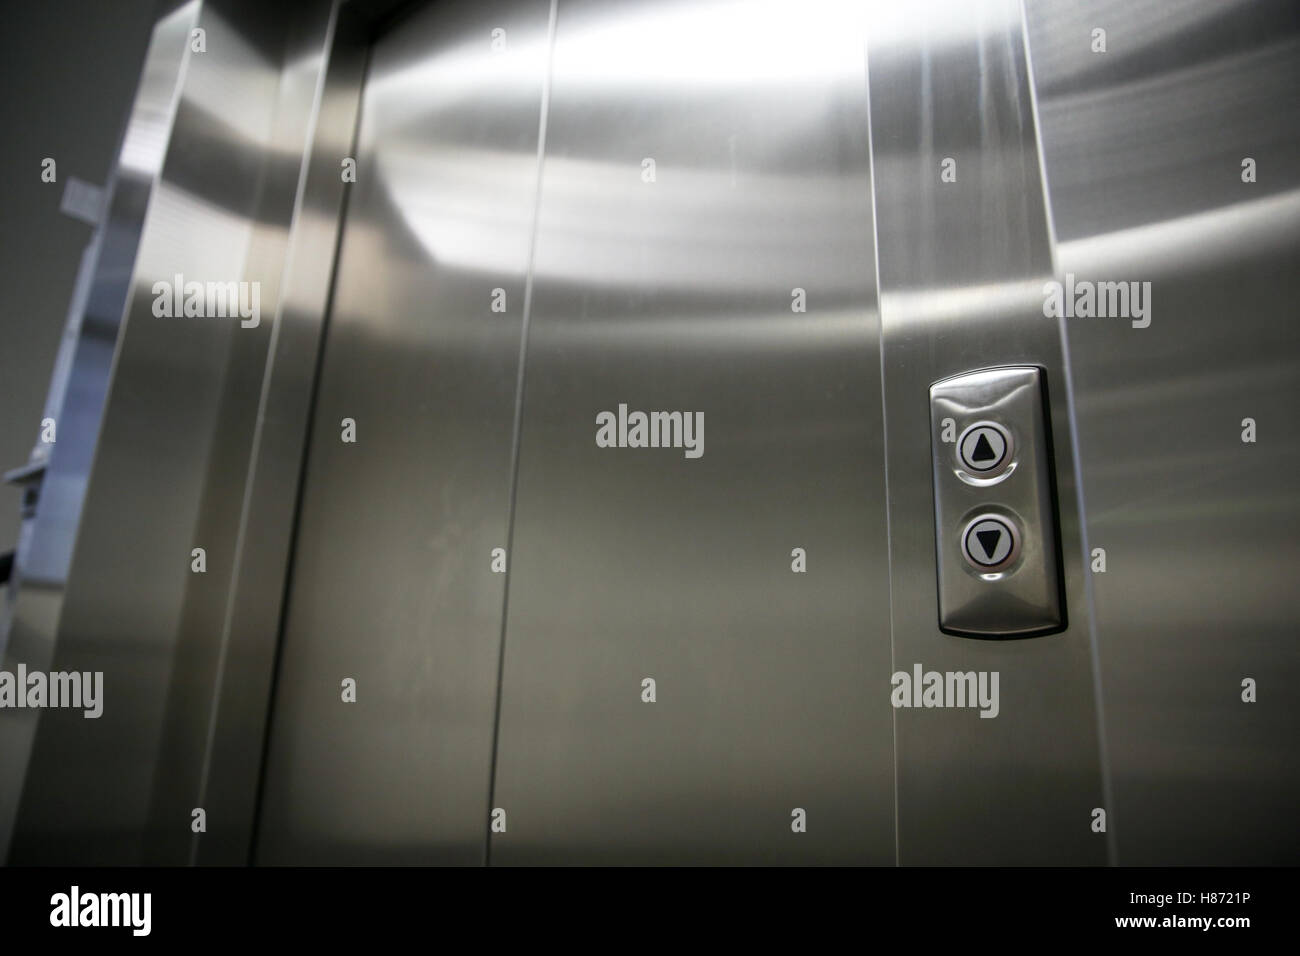 elevator or lift closed metal doors and buttons Stock Photo